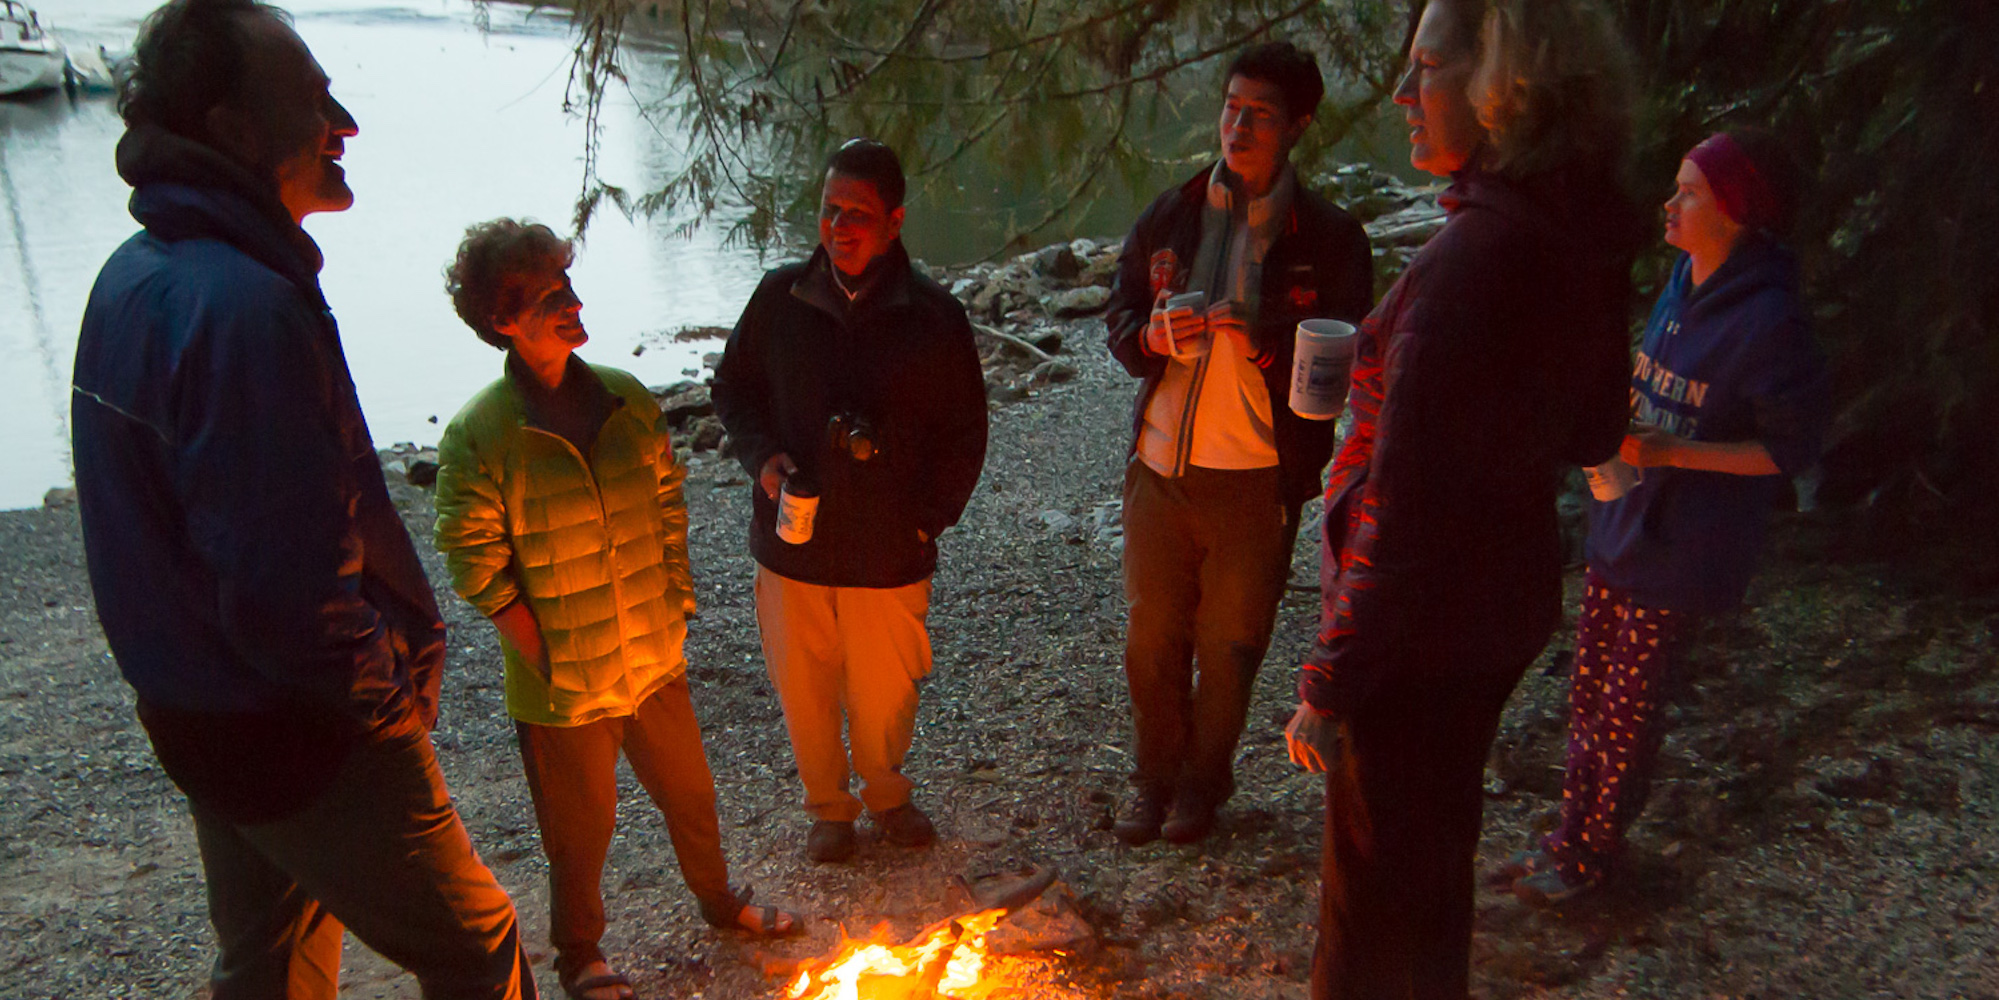 People in puffy jackets standing around a campfire on a rocky beach at sunset in British Columbia